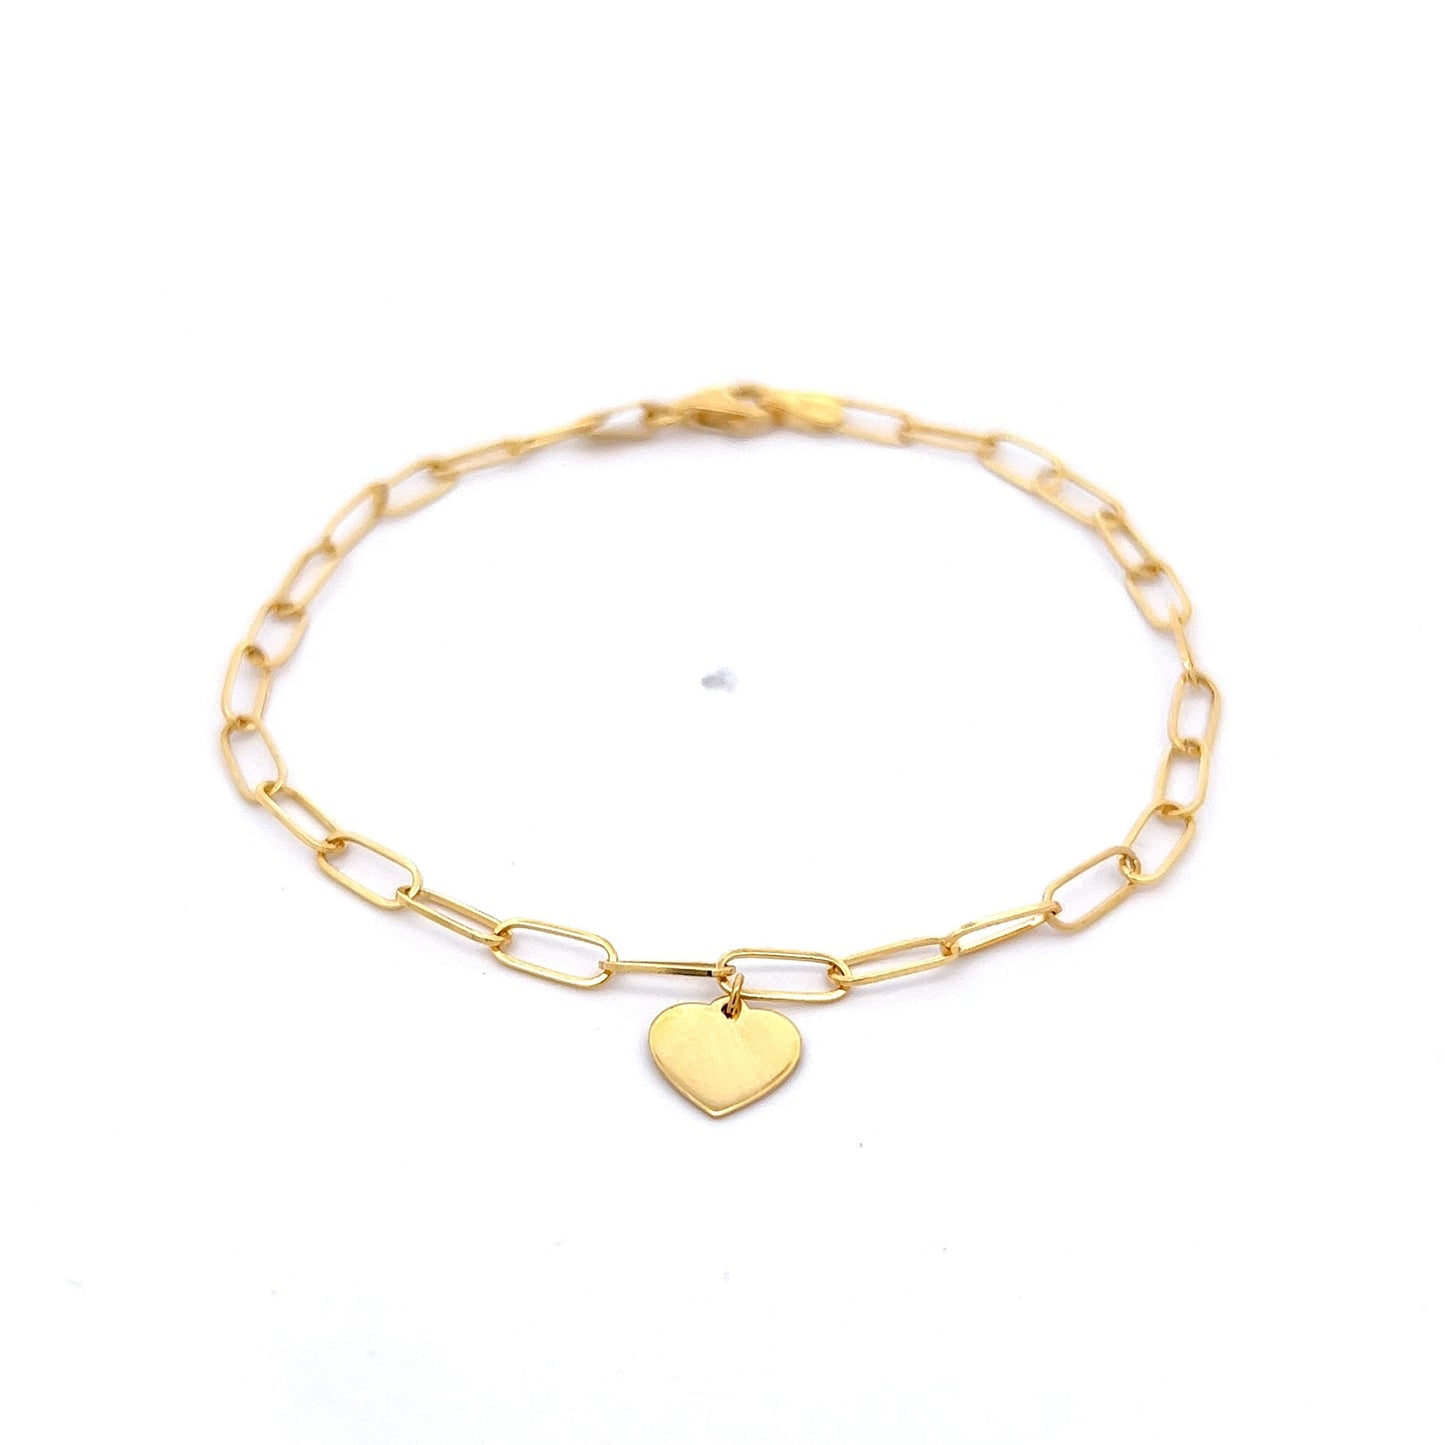 Paperclip Charm Bracelet in 14k Yellow Gold